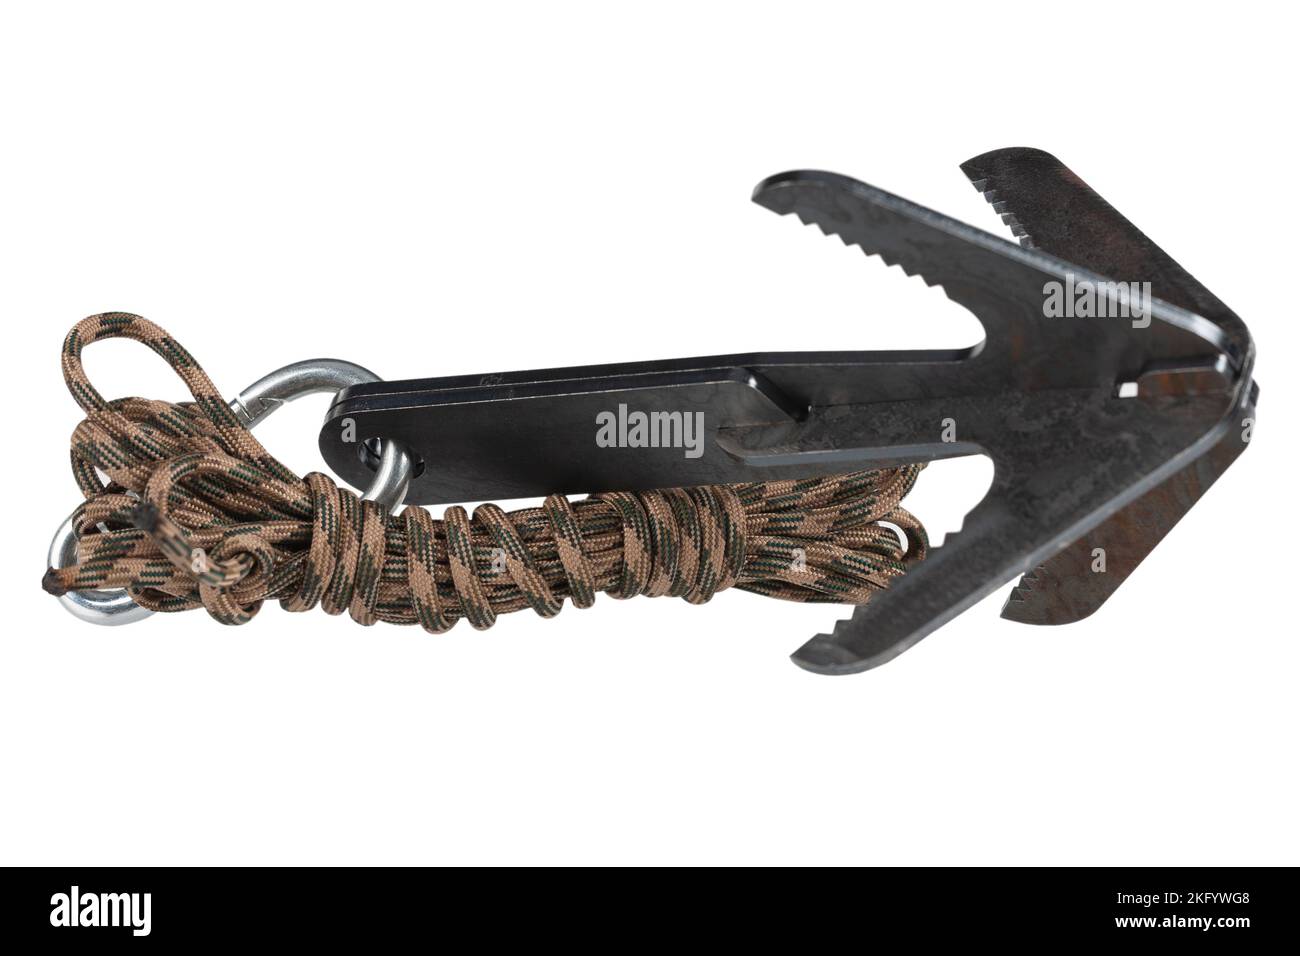 Grappling hook Cut Out Stock Images & Pictures - Alamy